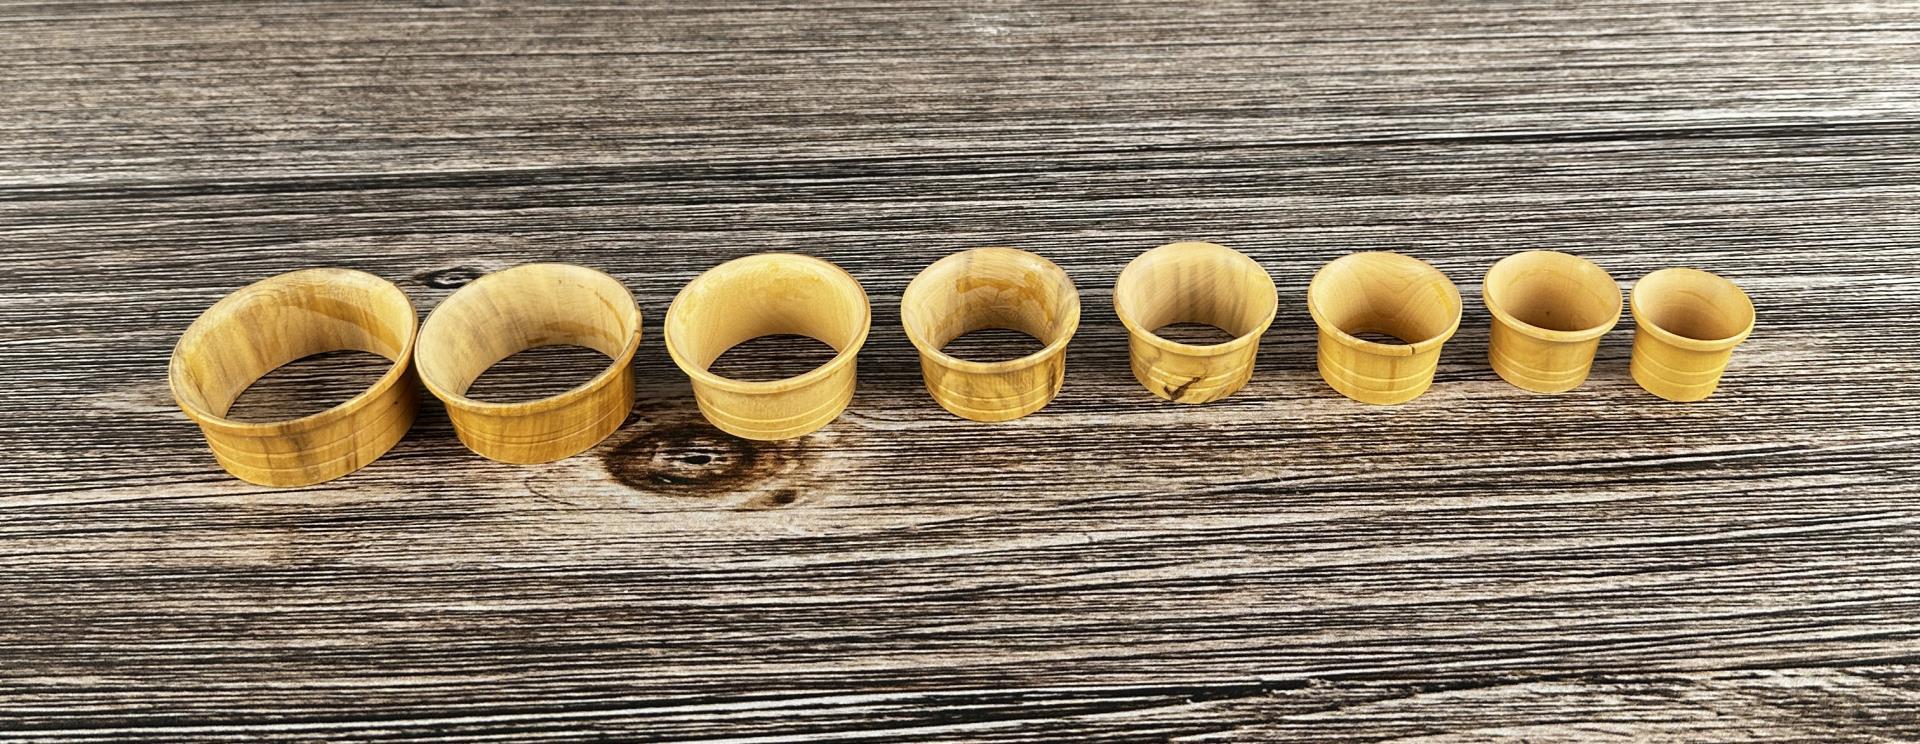 Set Of Wooden Ring Sizers